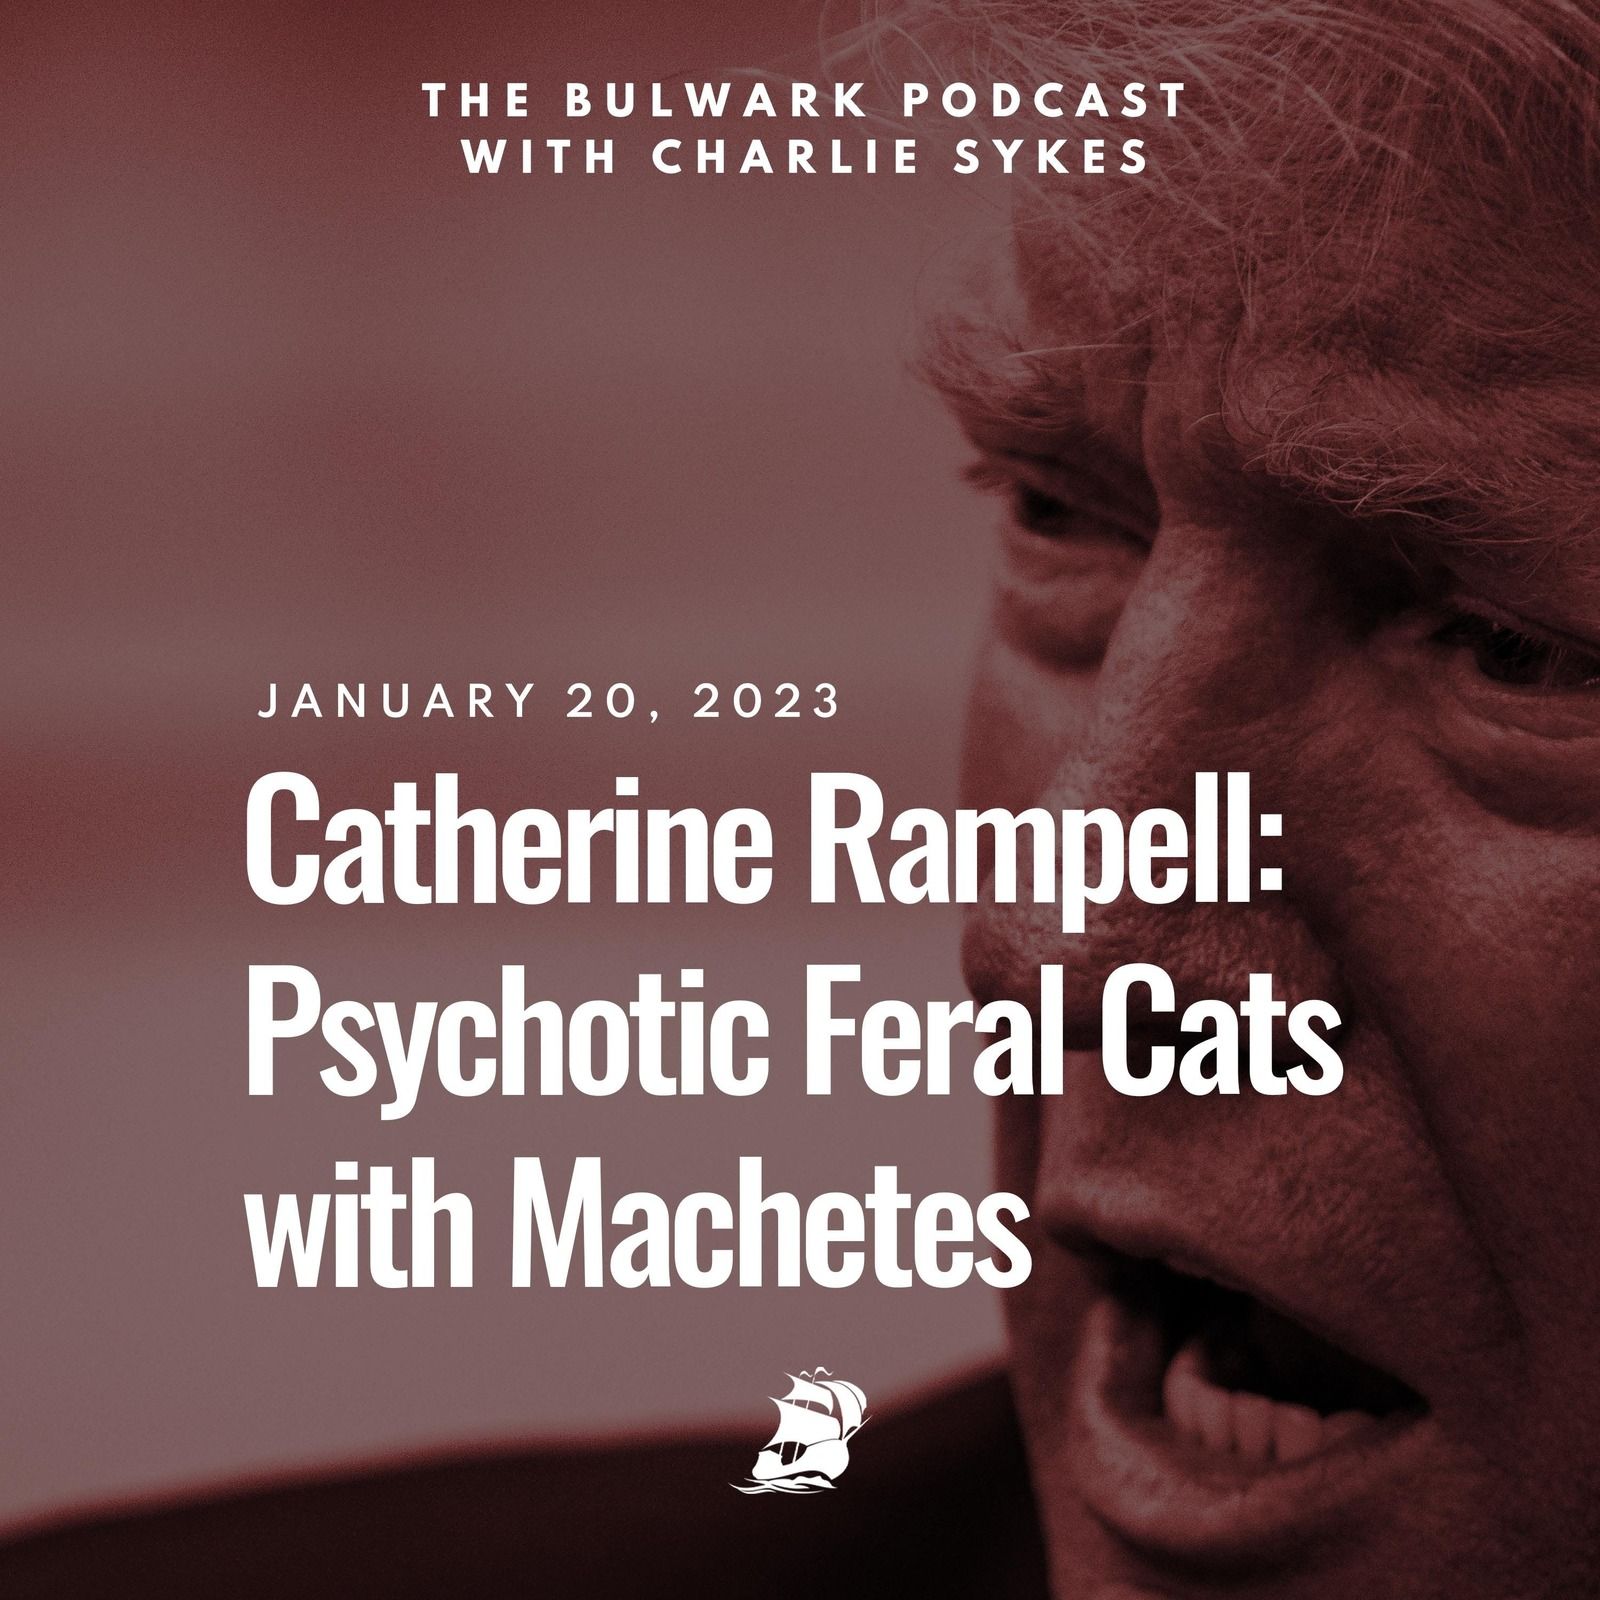 Catherine Rampell: Psychotic Feral Cats with Machetes